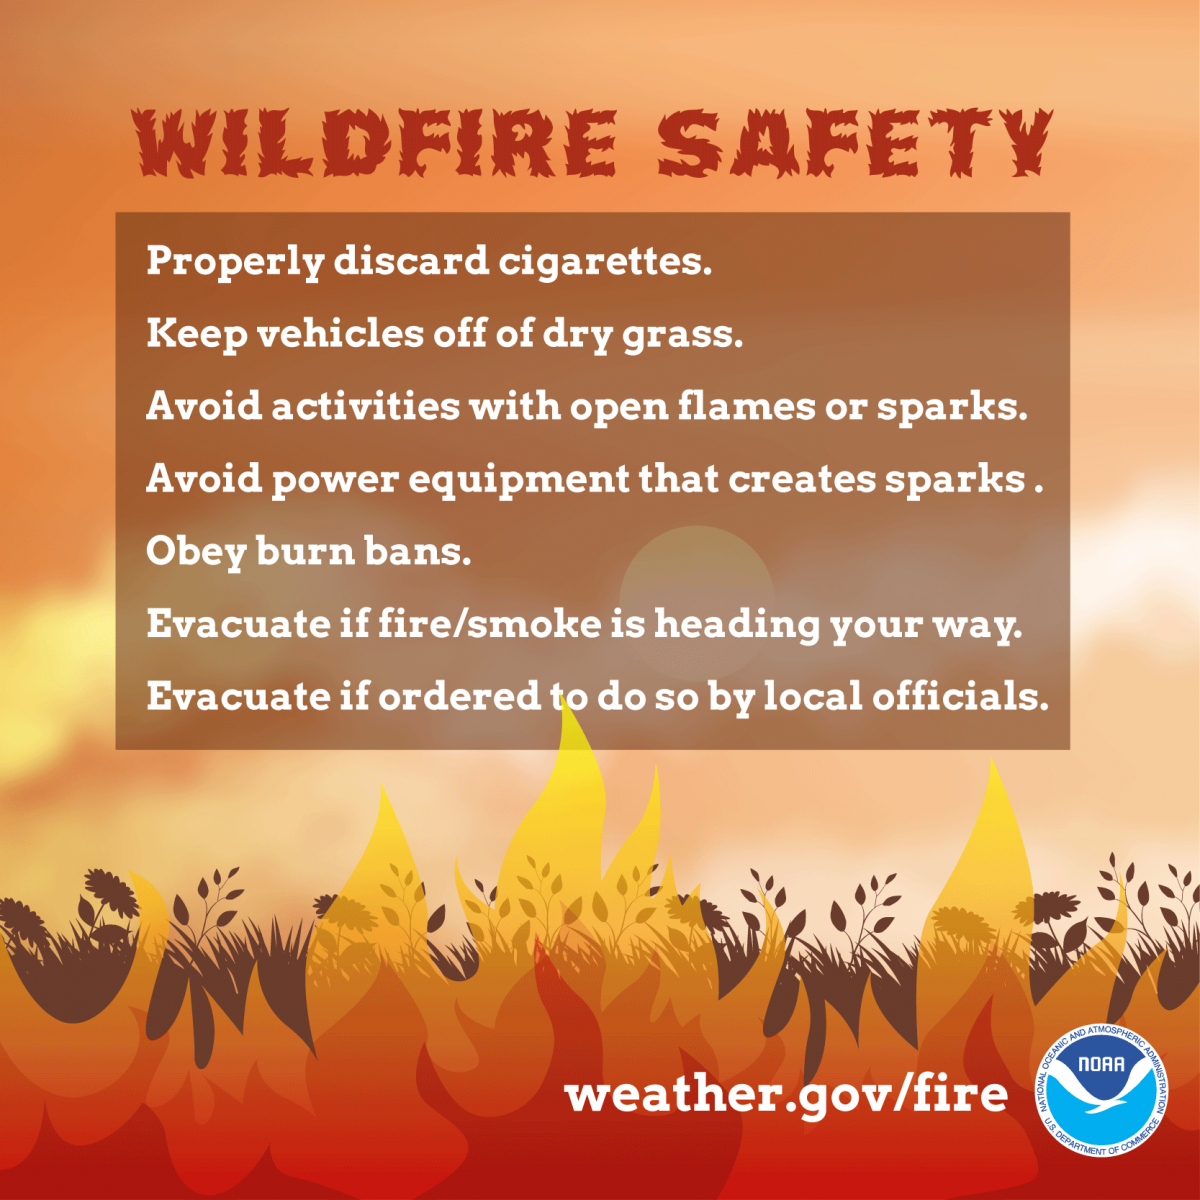 Practice wildfire safety by properly discarding of materials that could cause a fire, avoiding open flames, and obeying burn bans